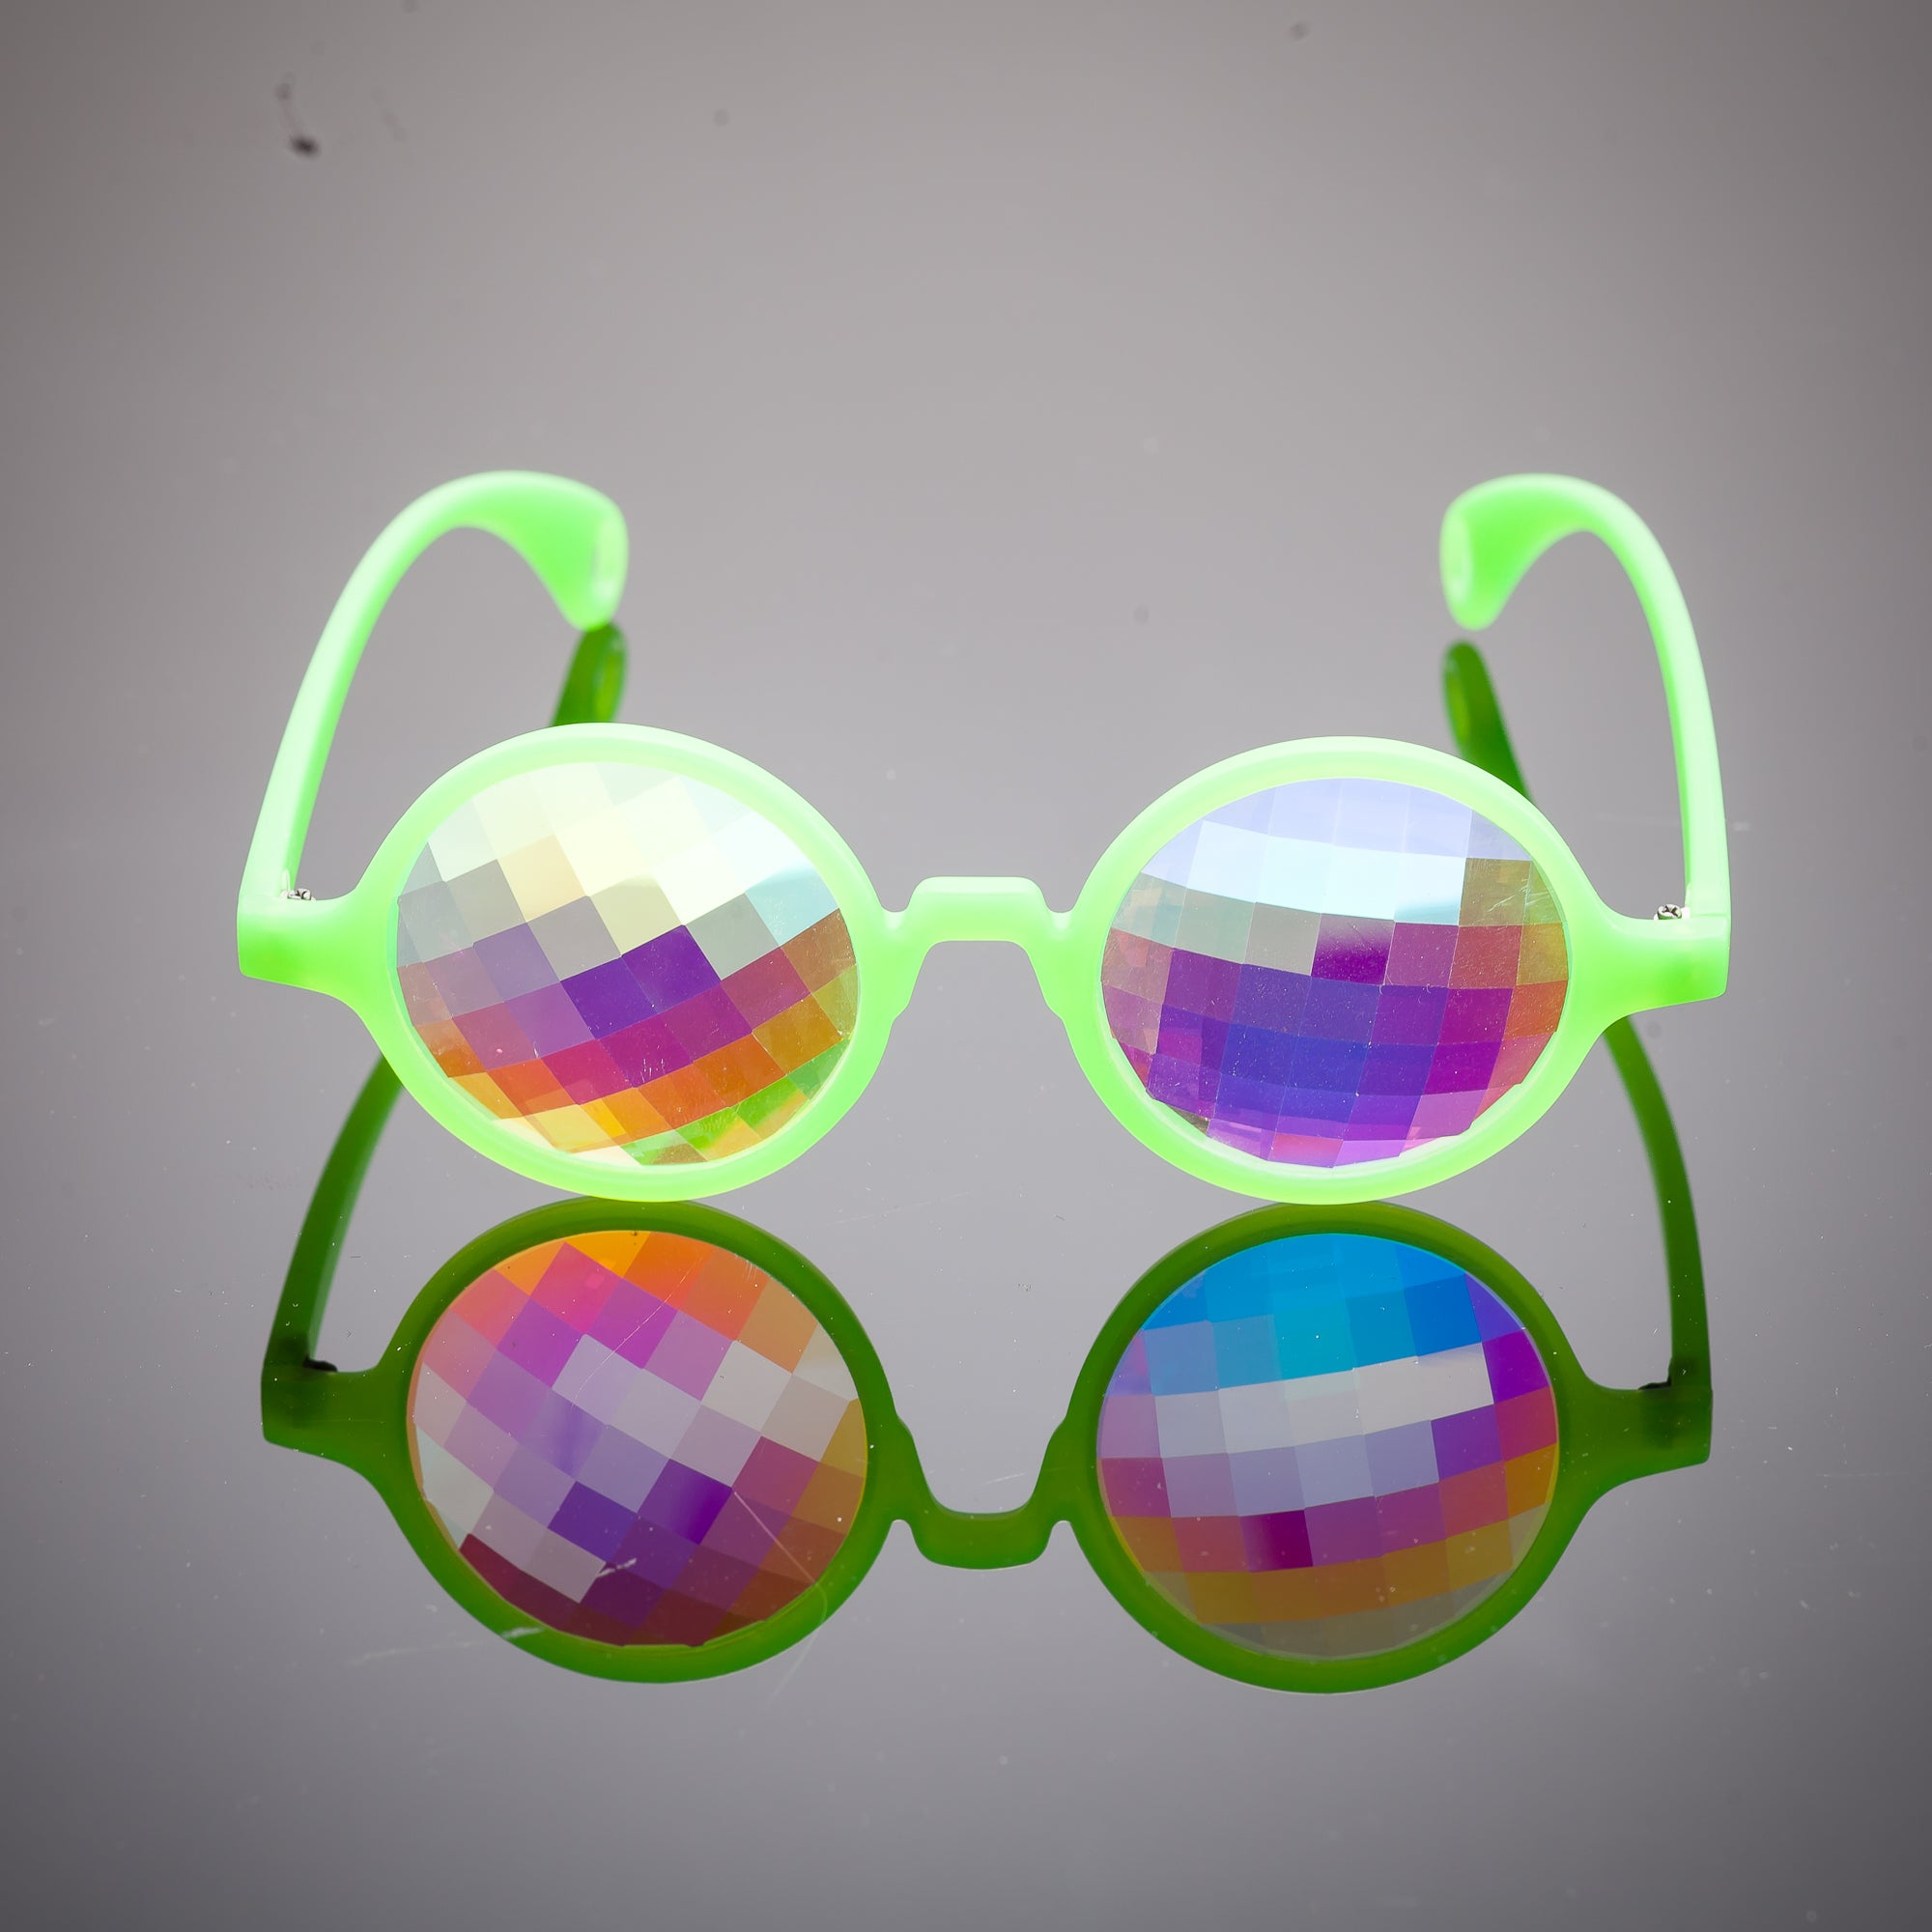 Intense Diamond Kaleidoscope Effect rainbow crystal lens Sunglasses Women Men Party Festival Bug Eye Portal Glow Green Round Glasses at SuperFried's Festival Accessories and Sunglasses Online store